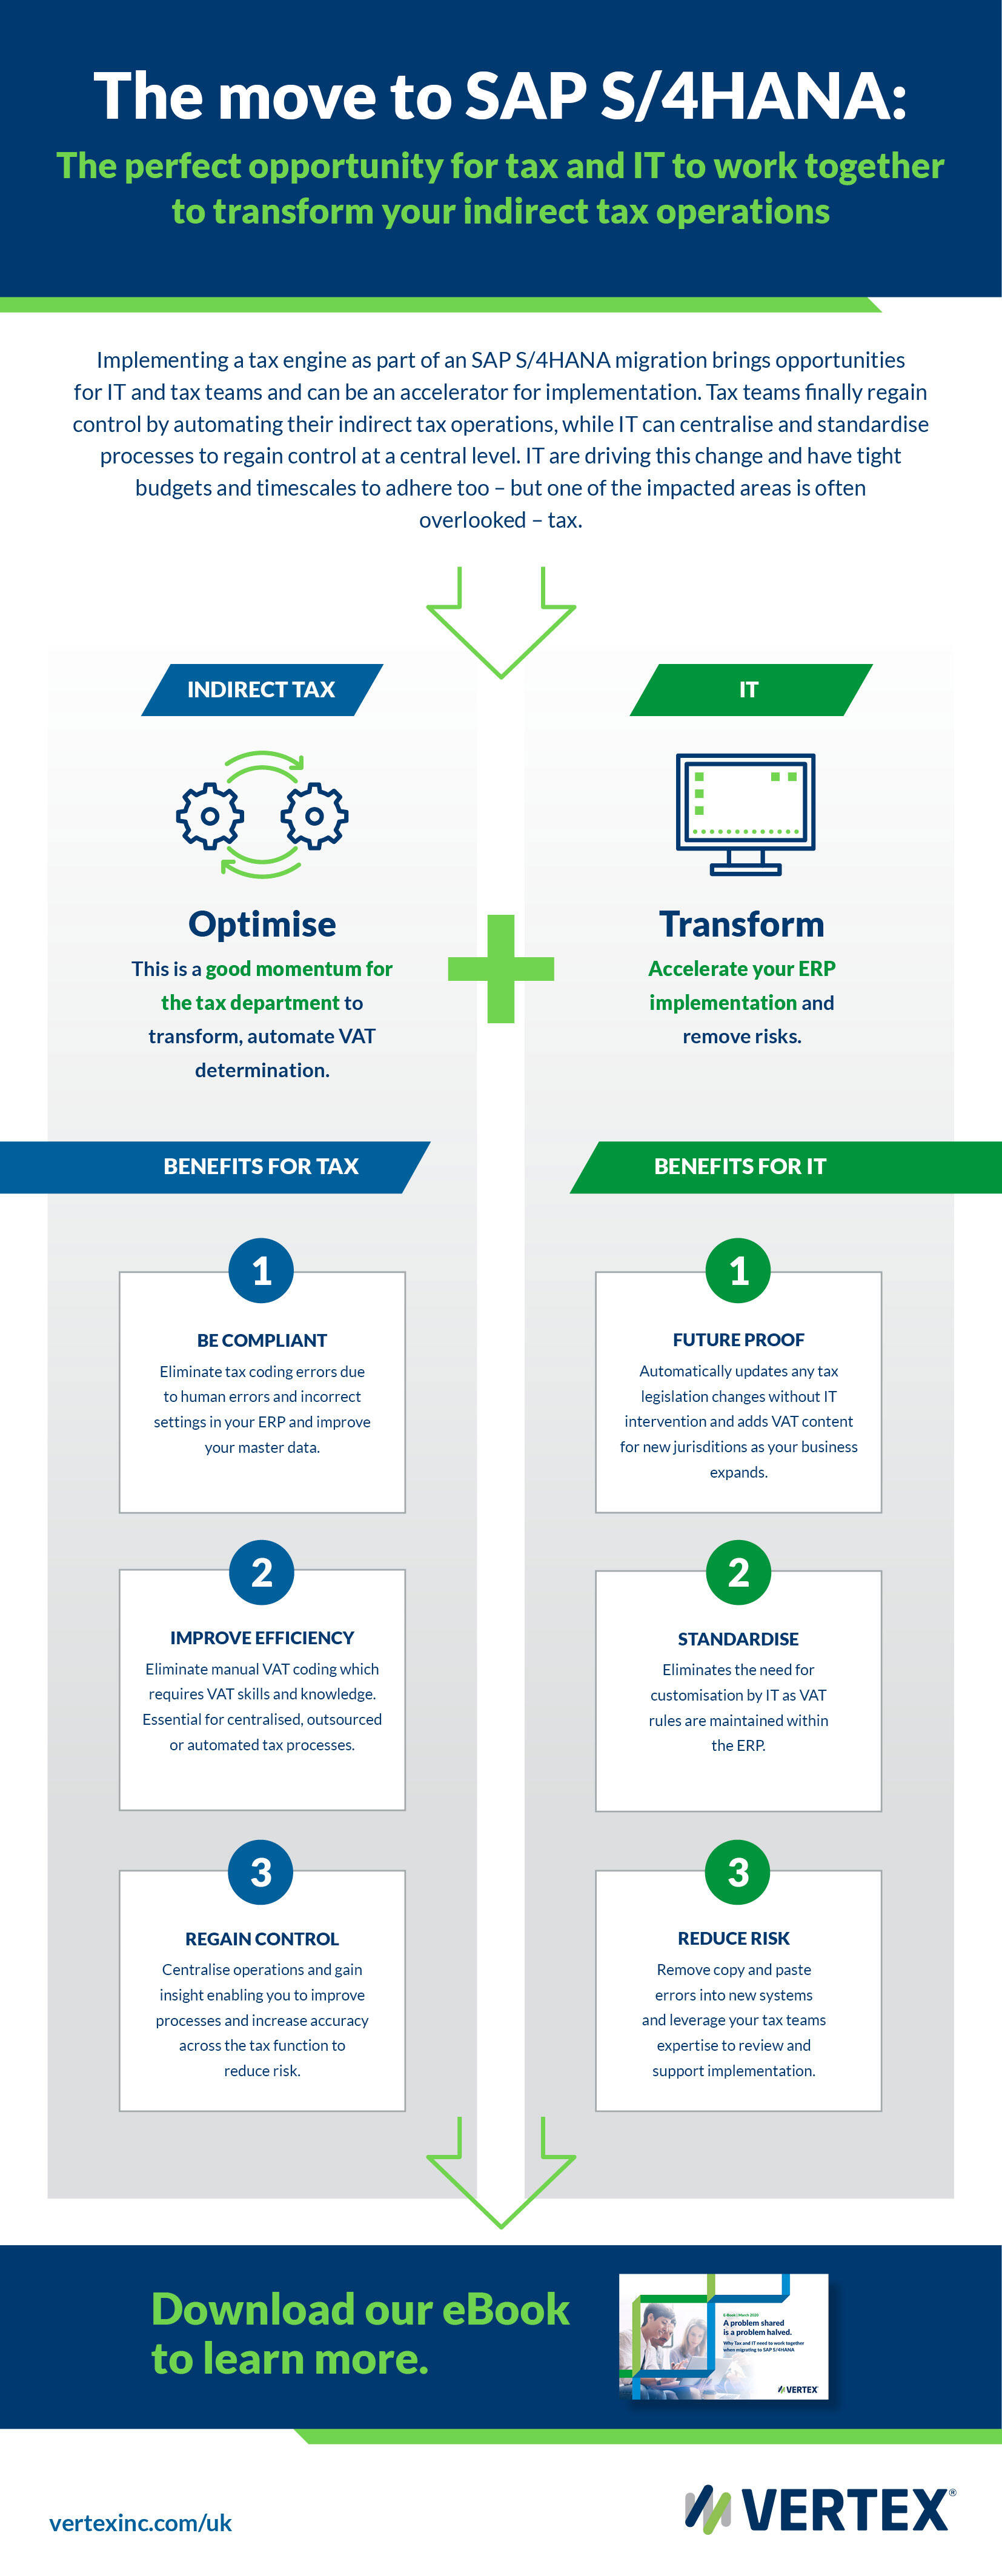 View this infographic to see how tax teams can finally regain control by automating their indirect tax operations, while IT can centralise and standardize processes to regain control at a central level.